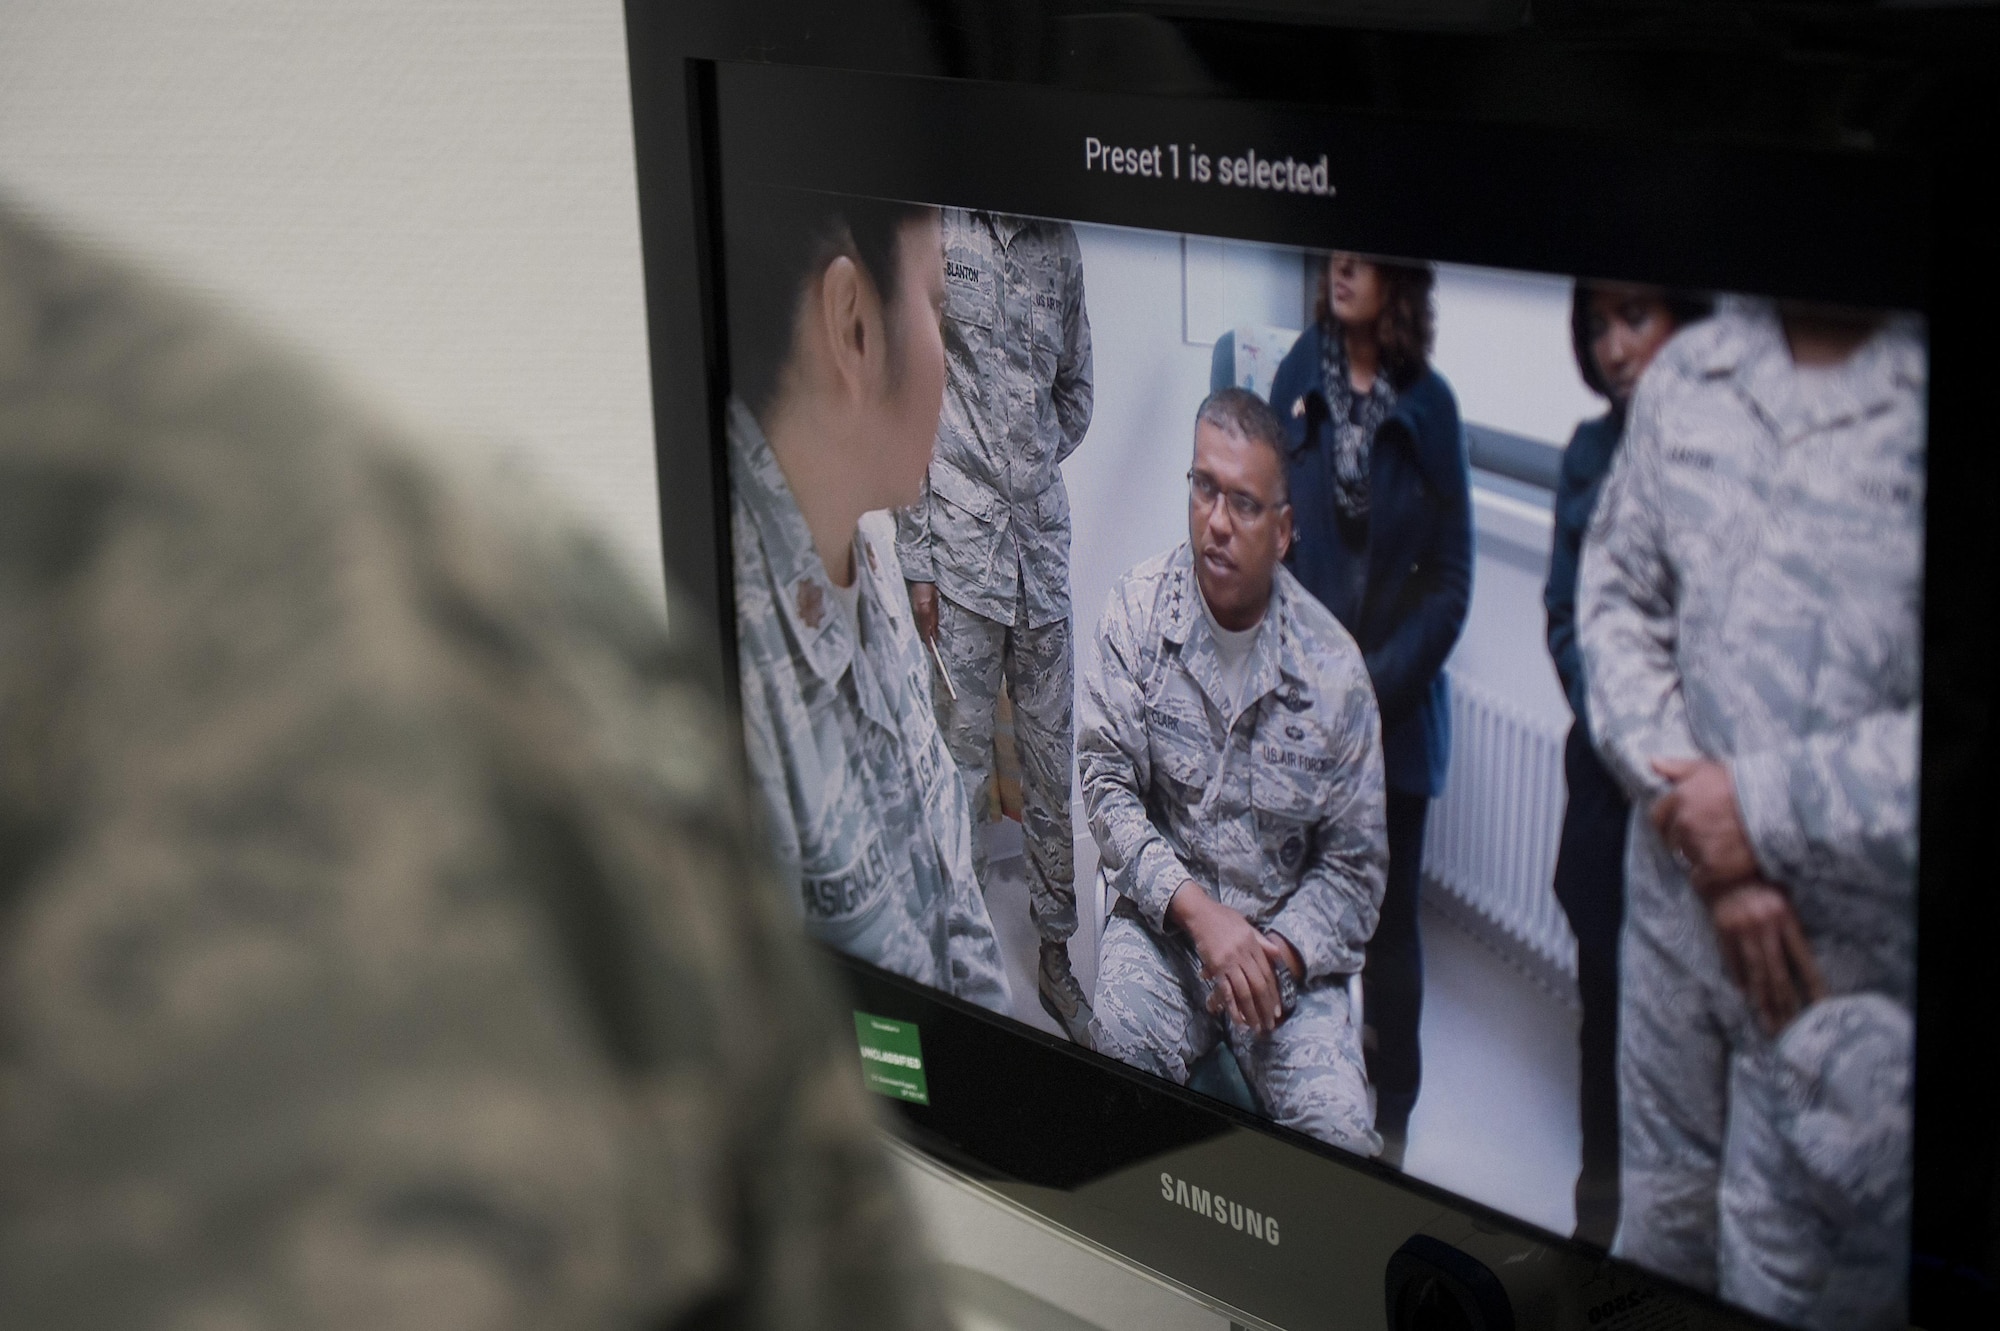 U.S. Air Force Lt. Gen. Richard Clark, 3rd Air Force and 17th Expeditionary Air Force commander, views how the 52nd Medical Group’s clinic uses technology to connect patients with doctors during a base familiarization tour at Spangdahlem Air Base, Dec. 14, 2016. Clark’s tour included a breakfast and lunch with outstanding performers, a brief about the wing’s accomplishments, a sneak peek at base renovations and an all call with more than 500 Airmen. (U.S. Air Force photo by Airman 1st Class Preston Cherry)